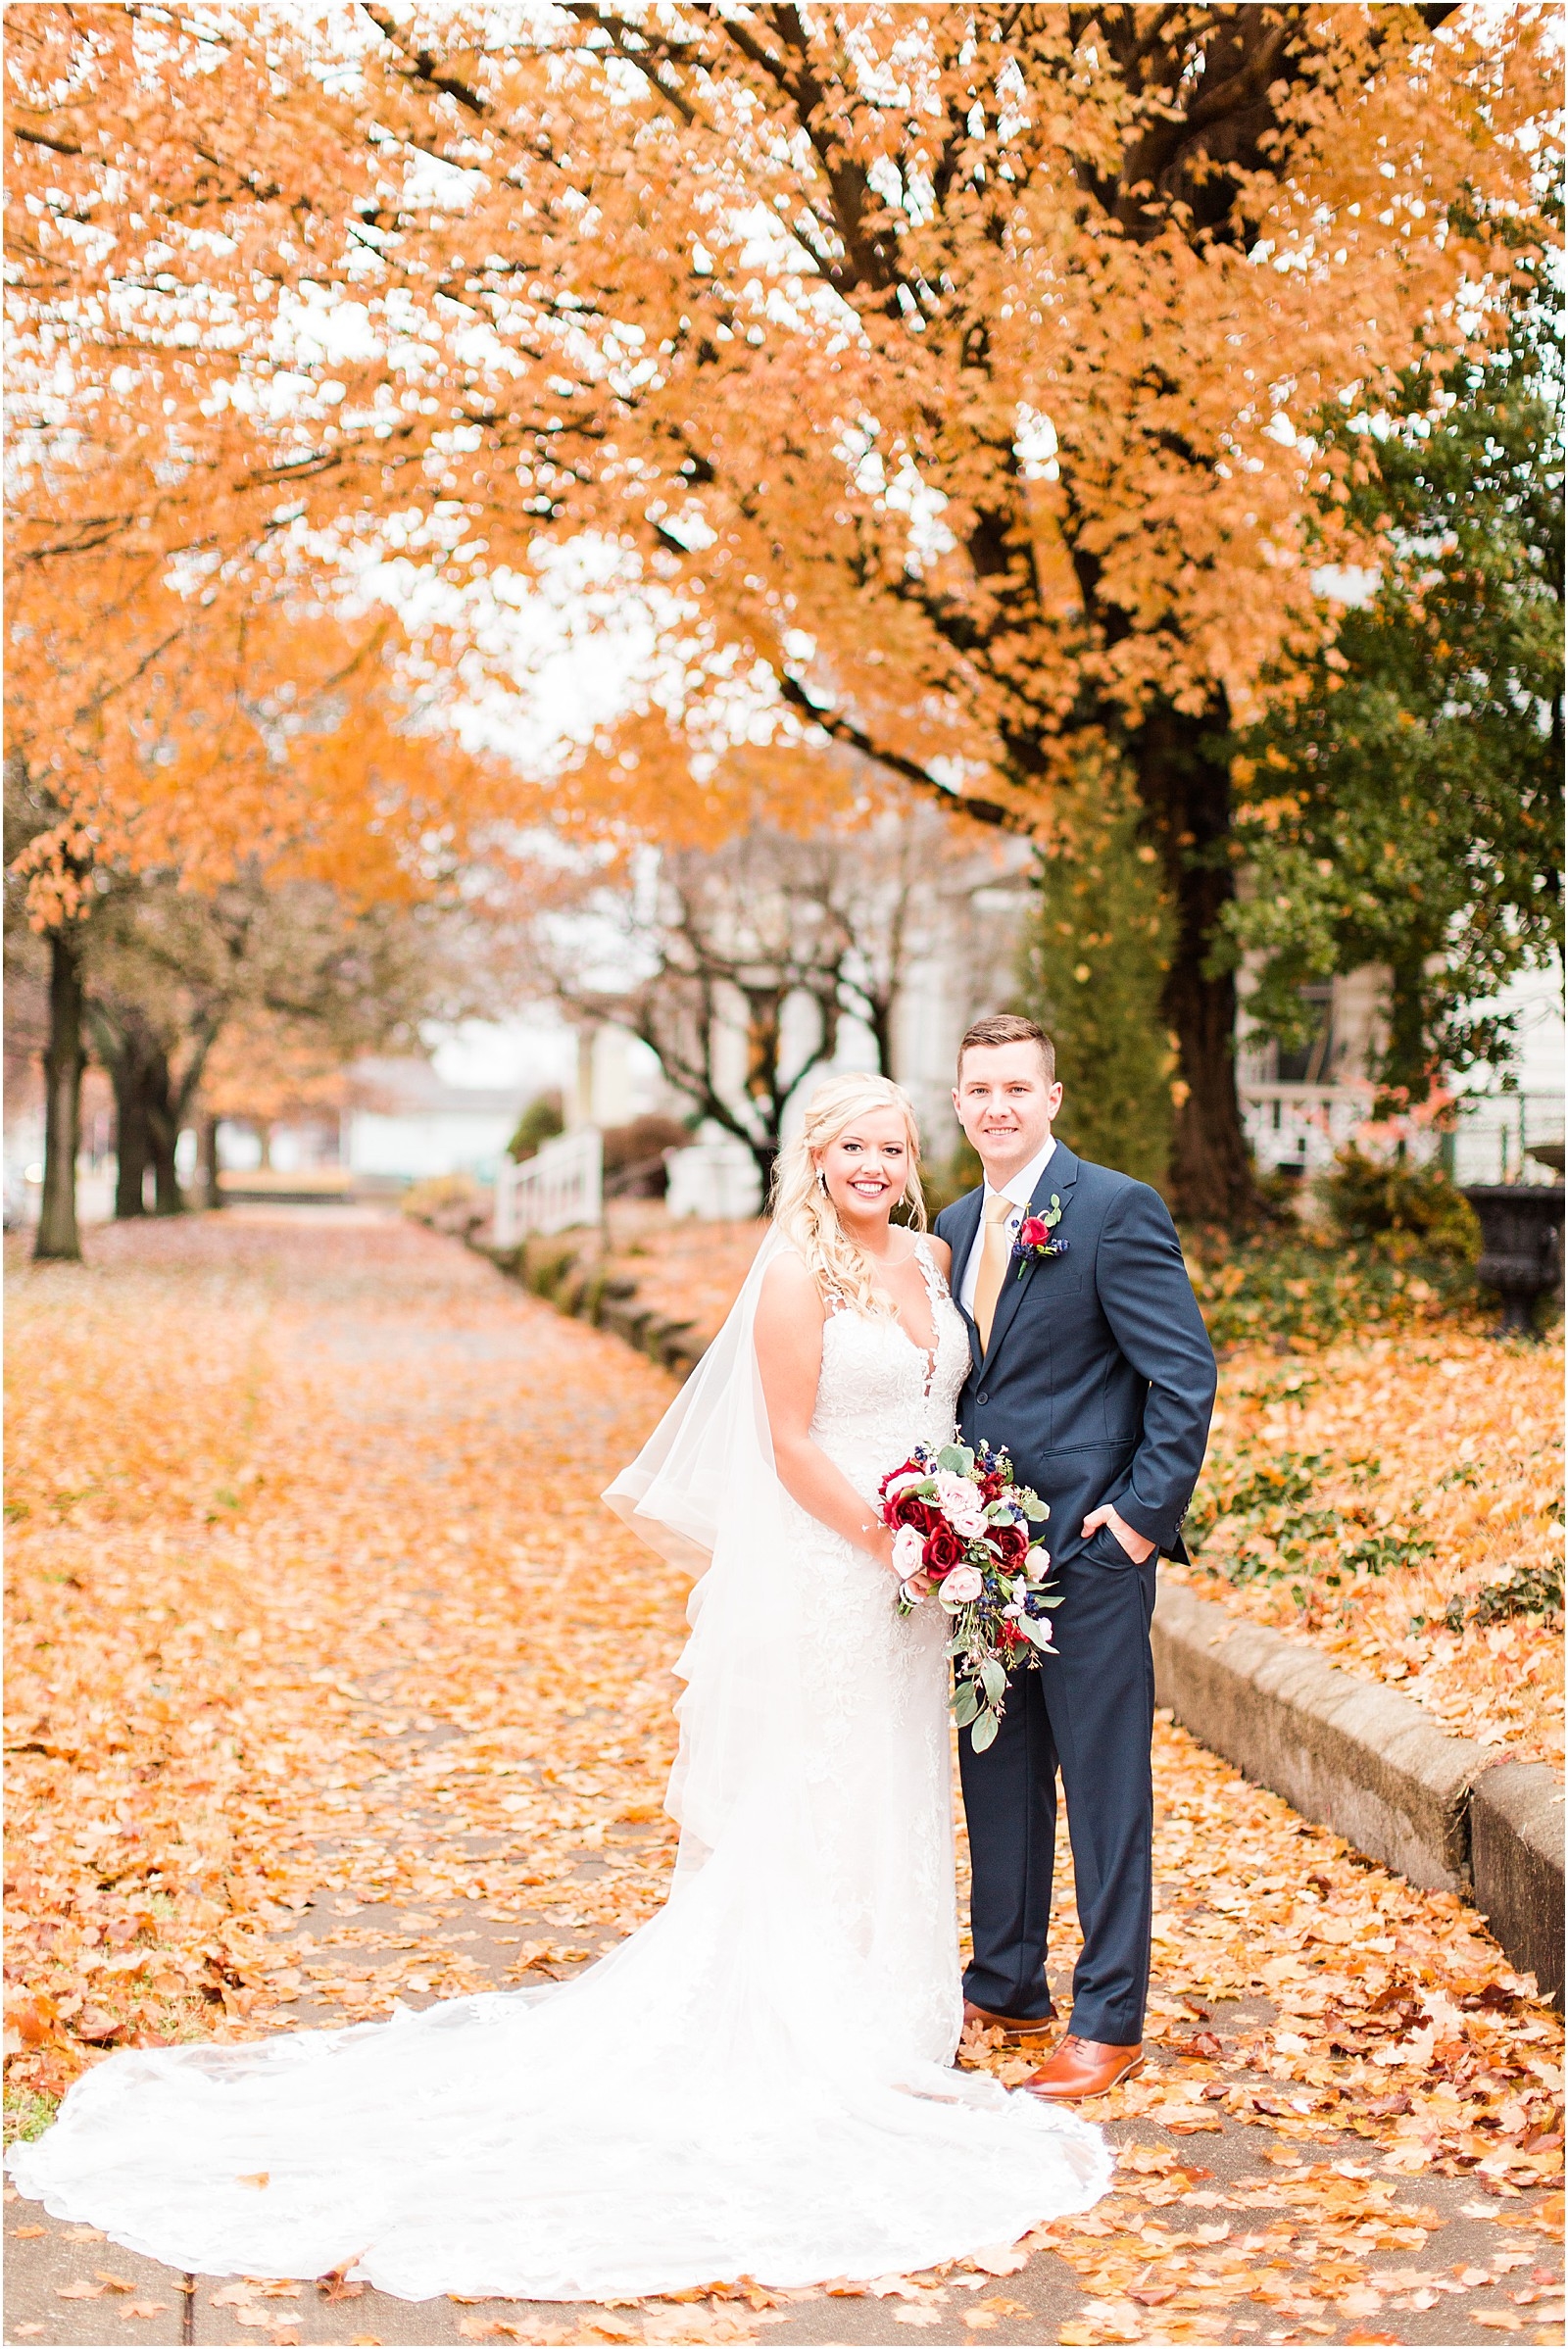 Haylee and Dillon's Evansville, Indiana wedding by Bret and Brandie Photography.0069.jpg